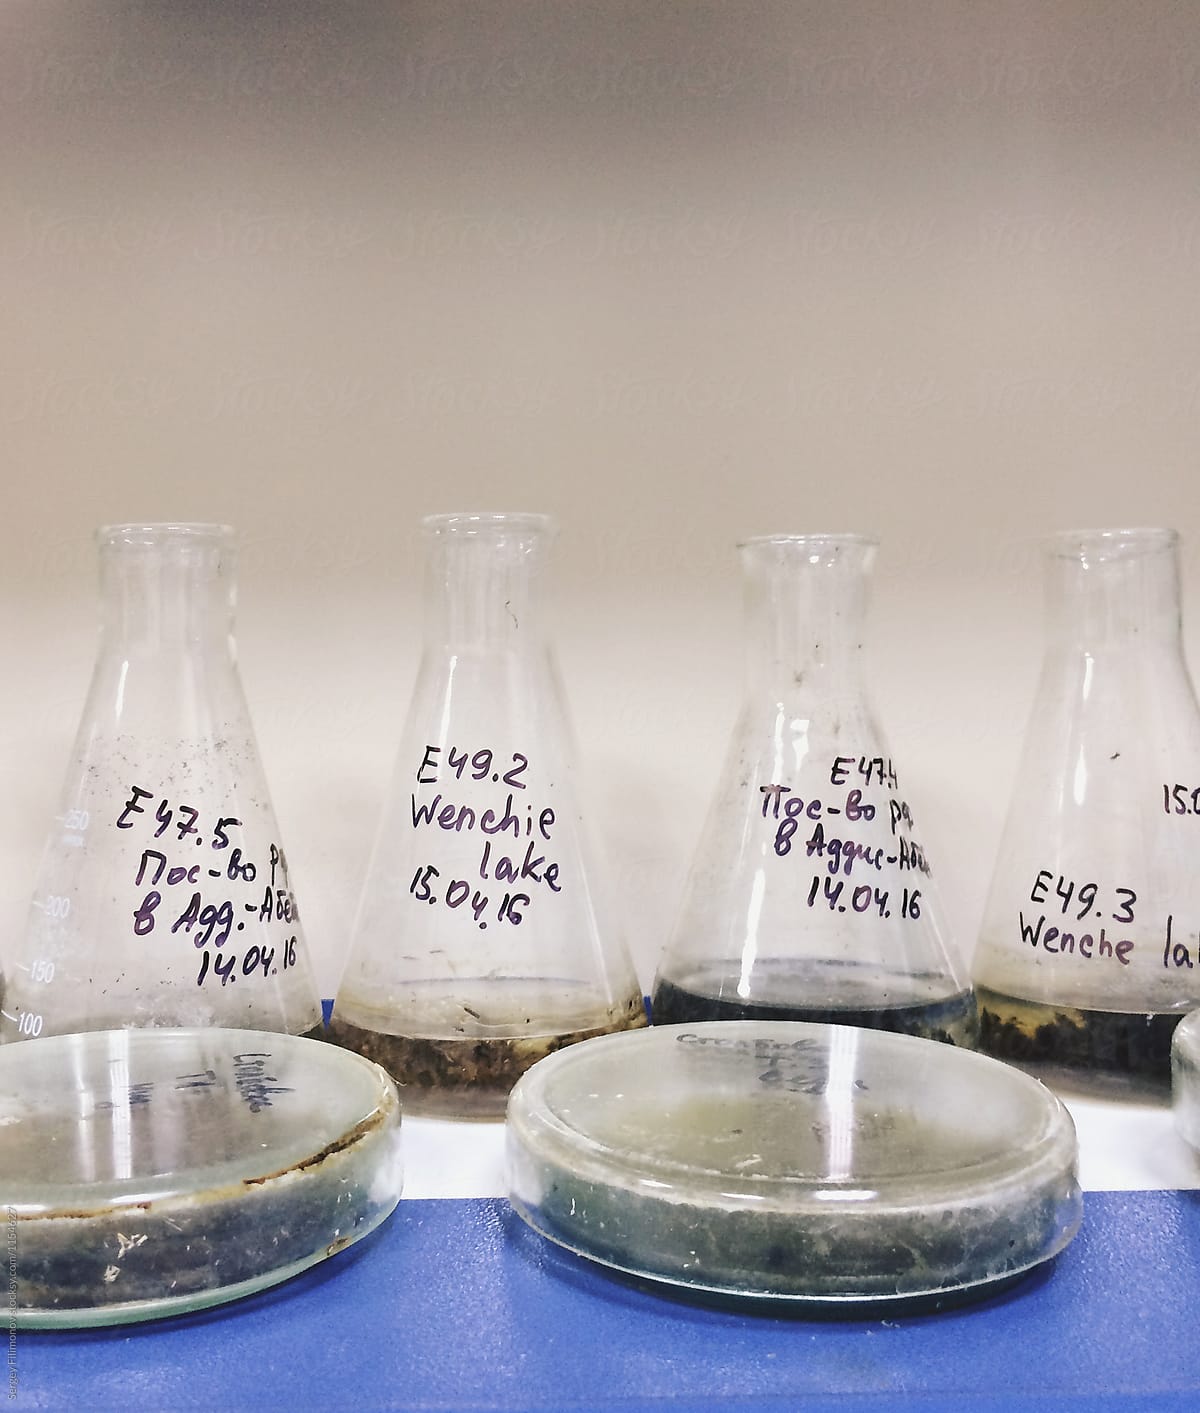 Flasks in medical laboratory with samples of water from the lake